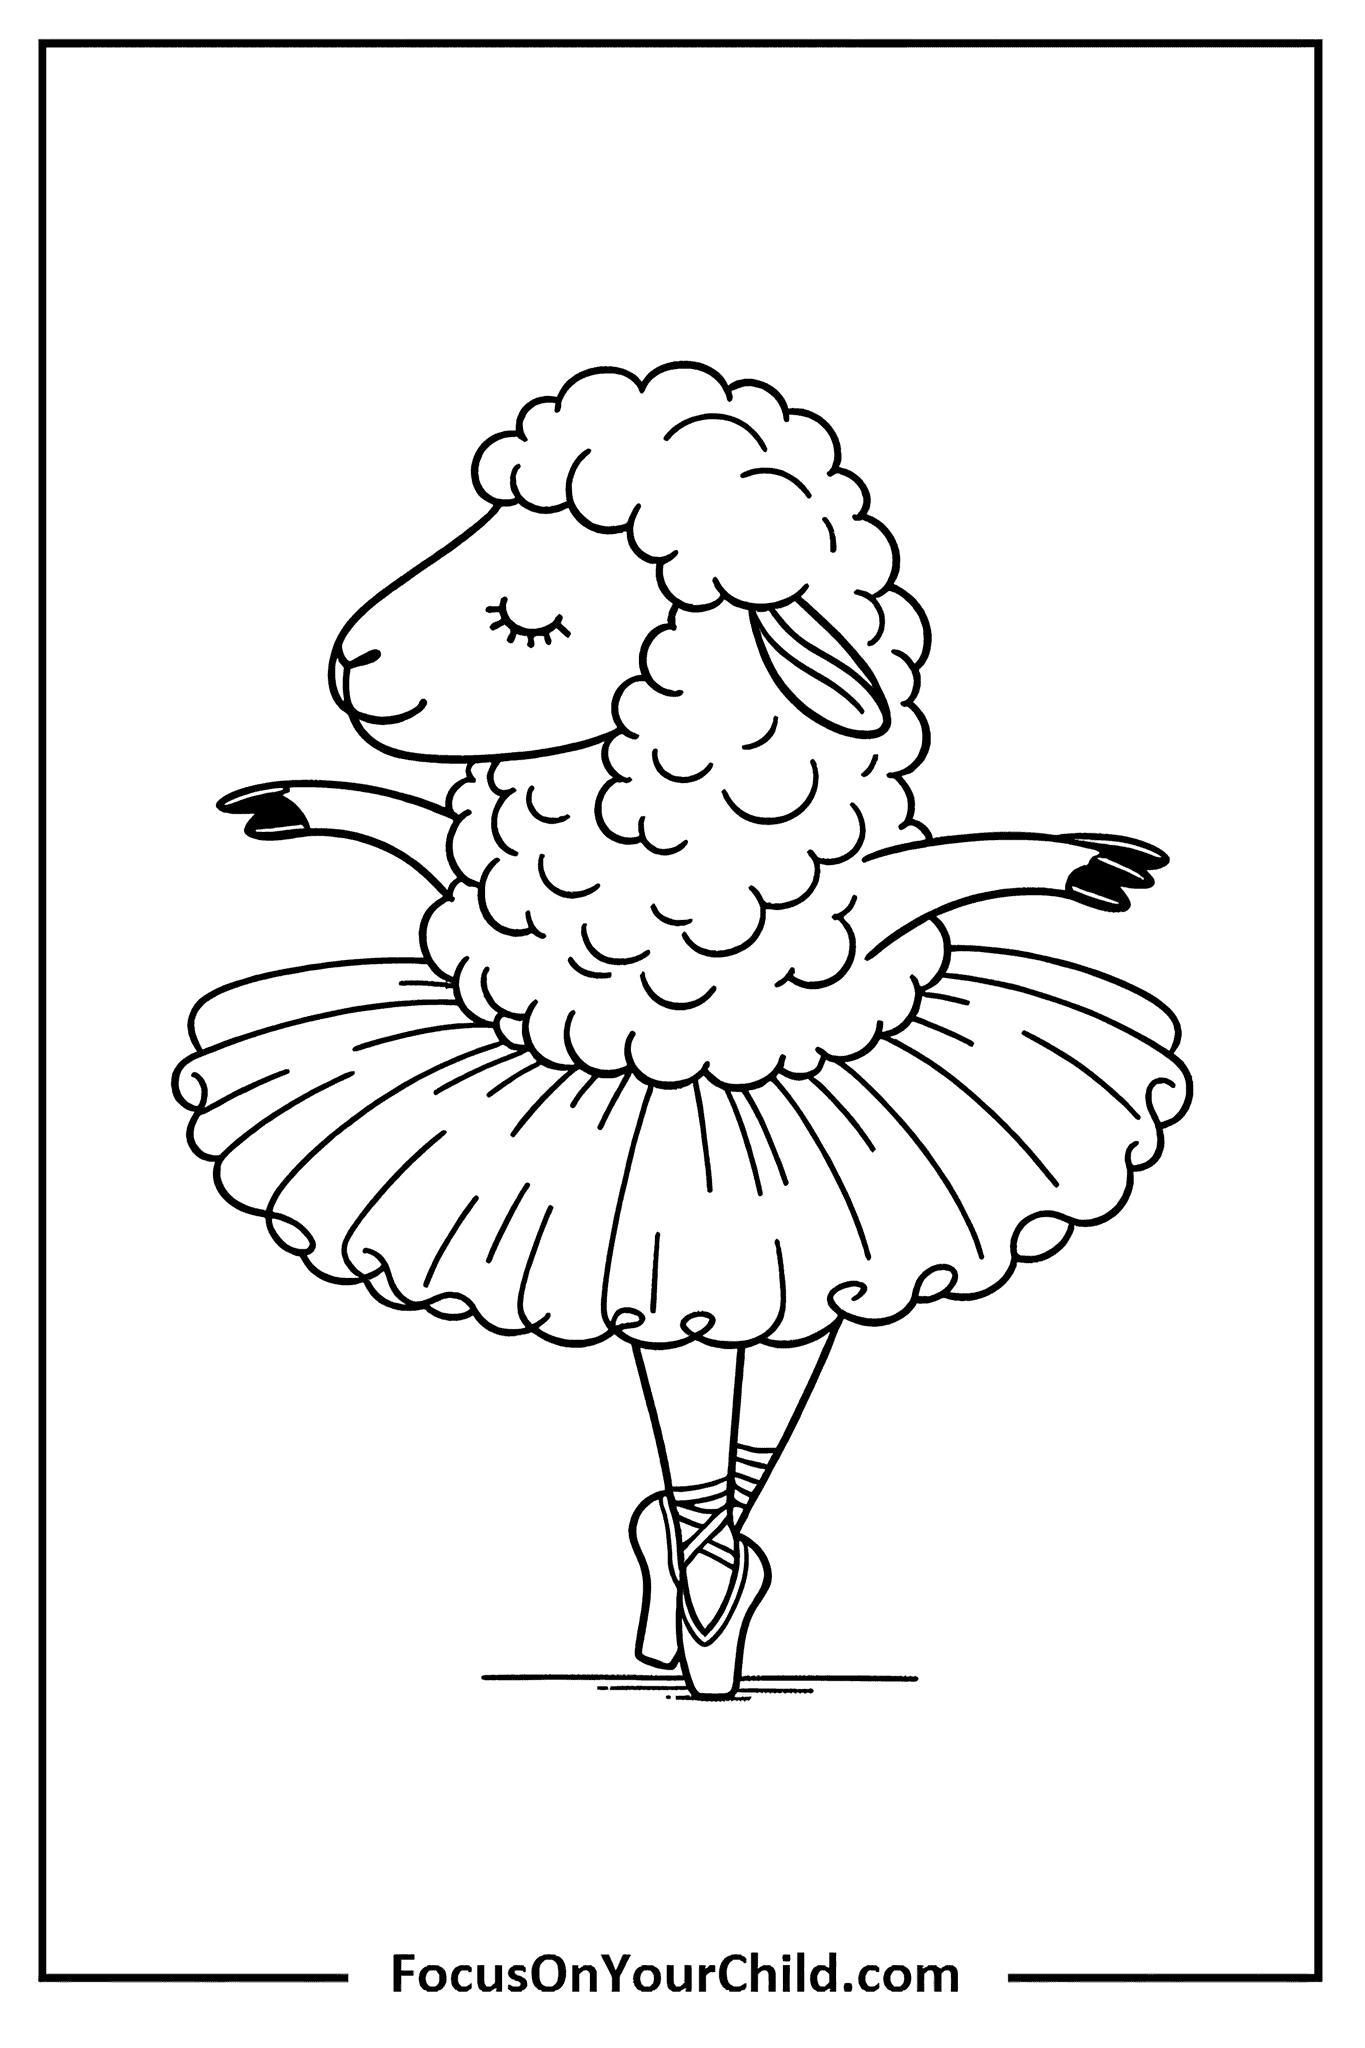 Ballerina sheep in tutu dancing gracefully, captured in detailed black and white line drawing.